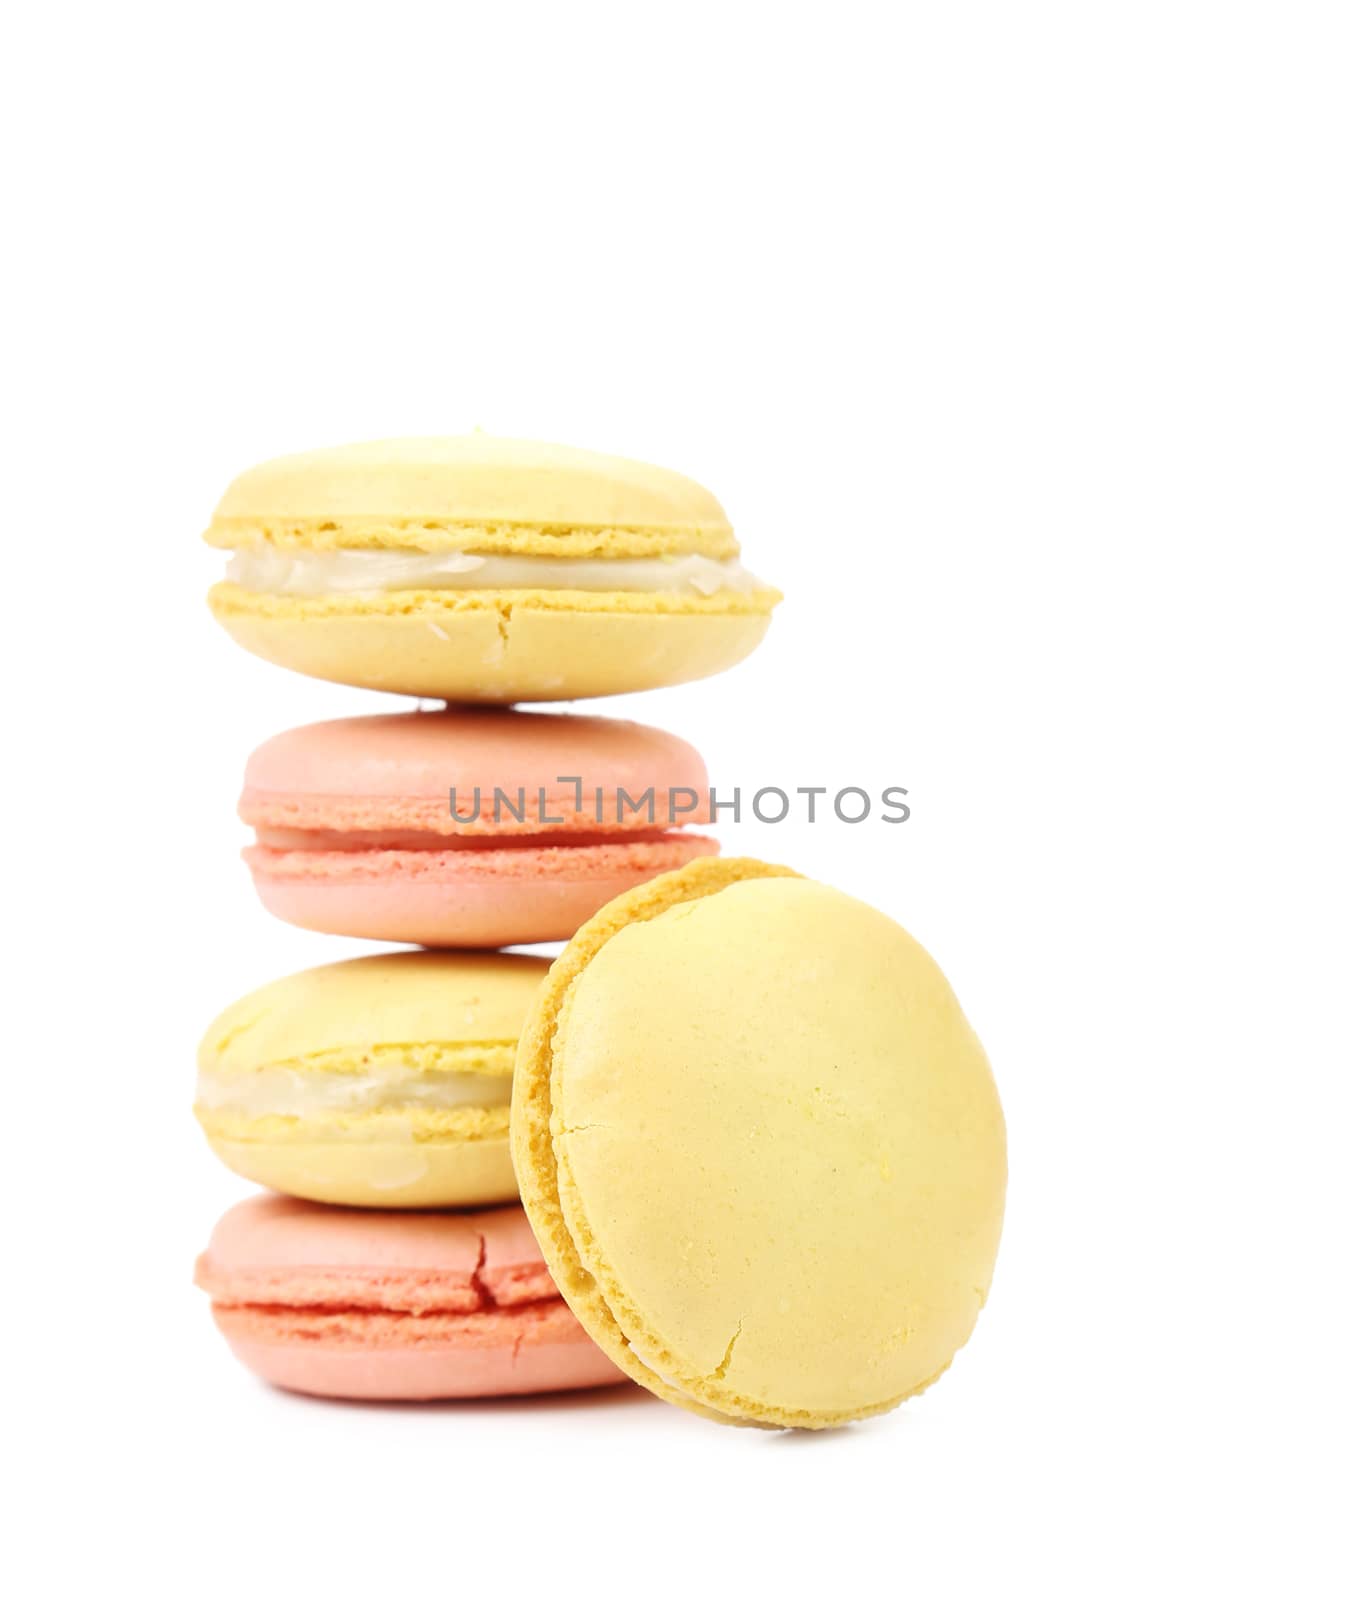 Colorful macaroon cakes. Isolated on a white background.